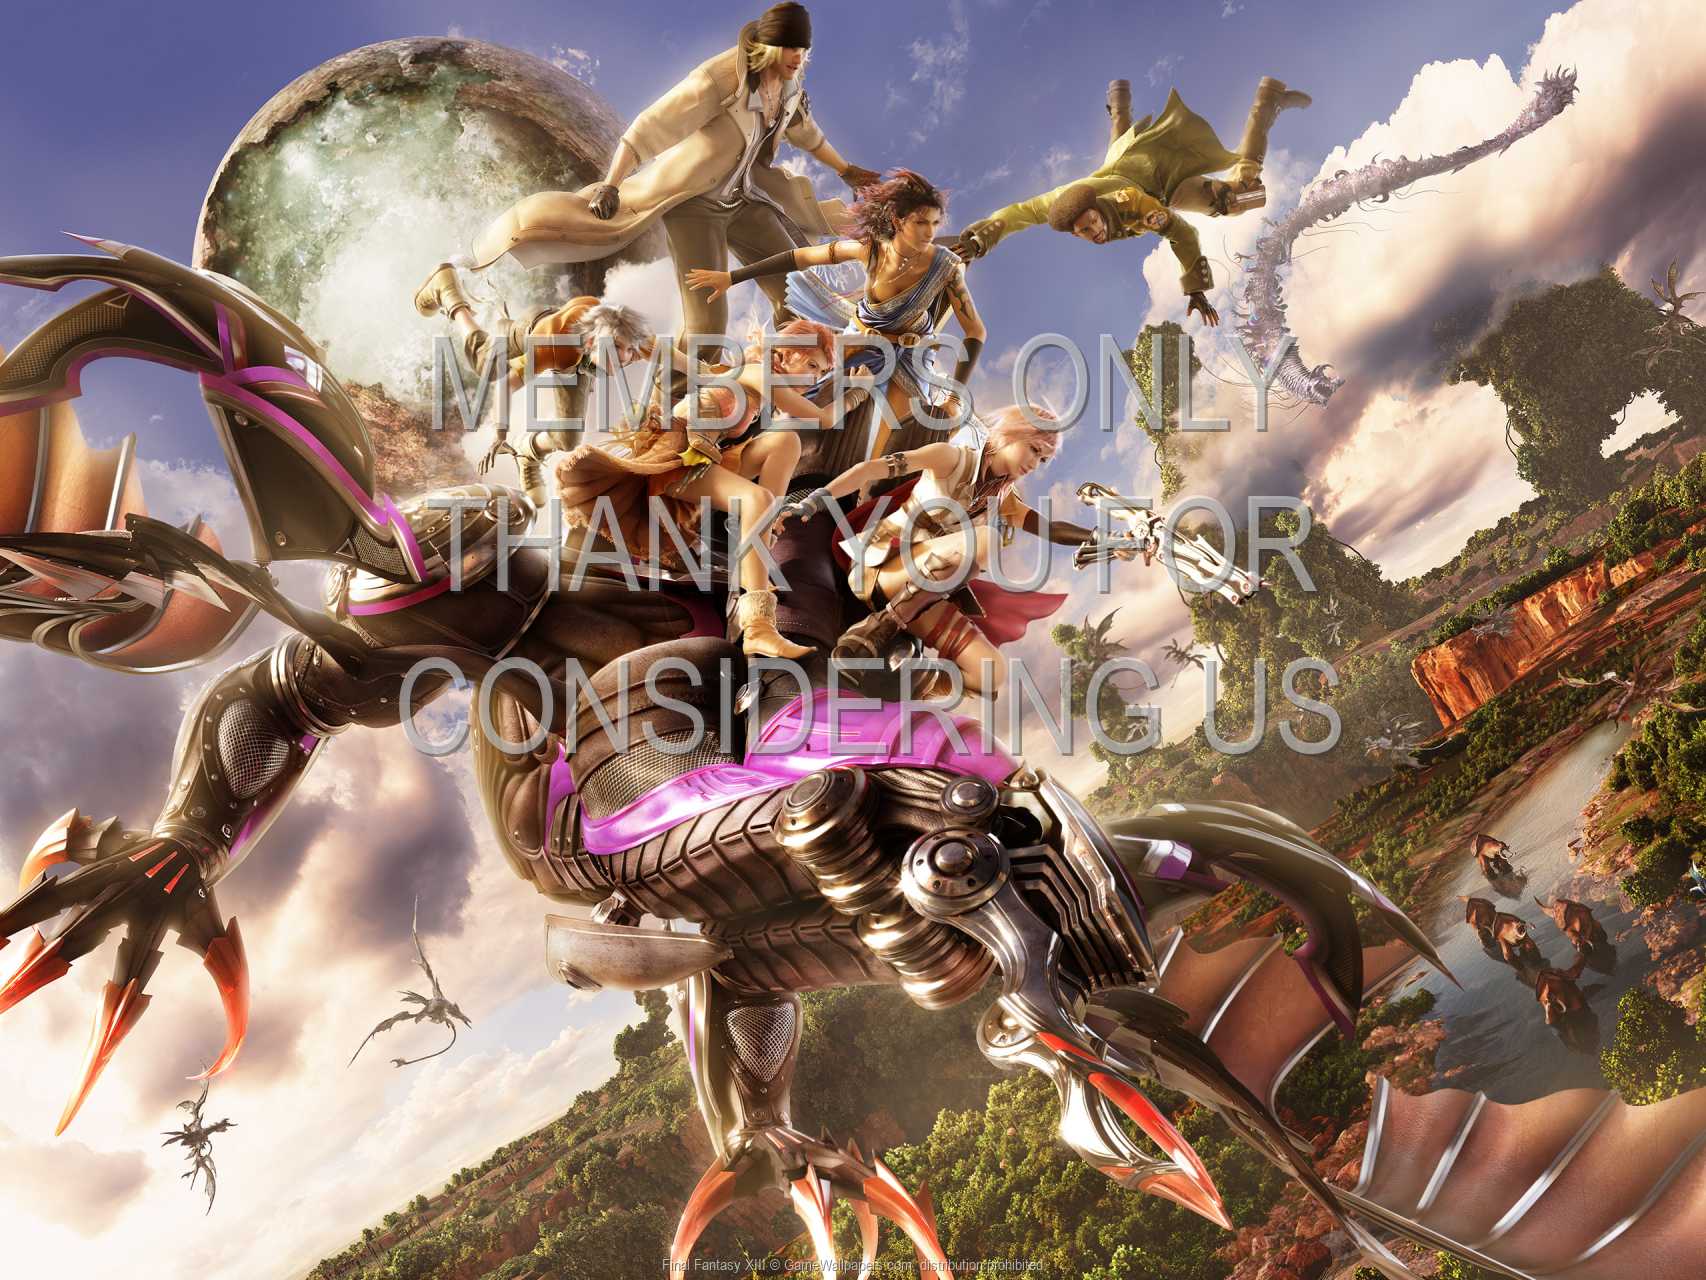 Final Fantasy XIII 720p%20Horizontal Mobile wallpaper or background 10